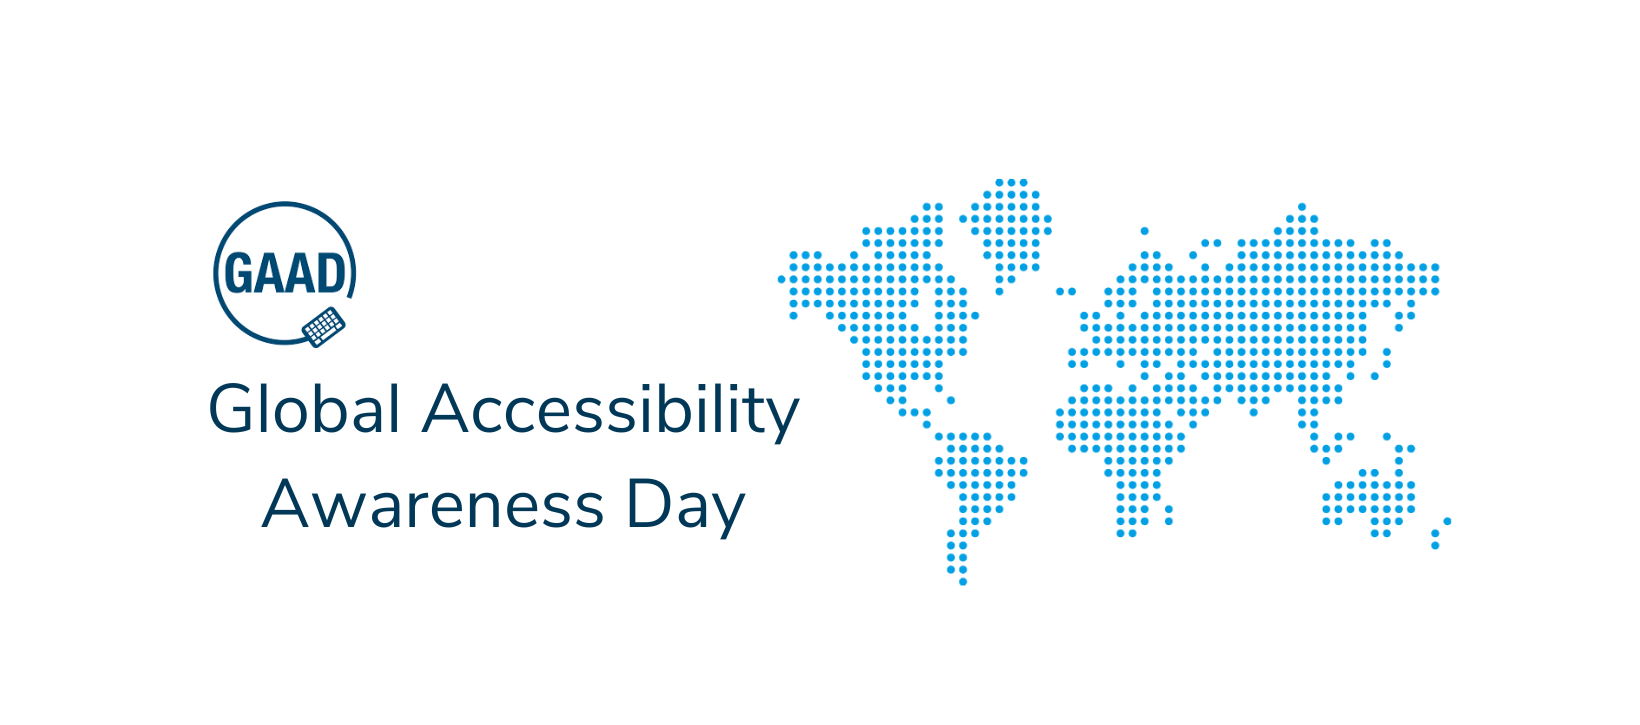 Global Accessibility Awareness Day and Ensuring Accessibility Every Day